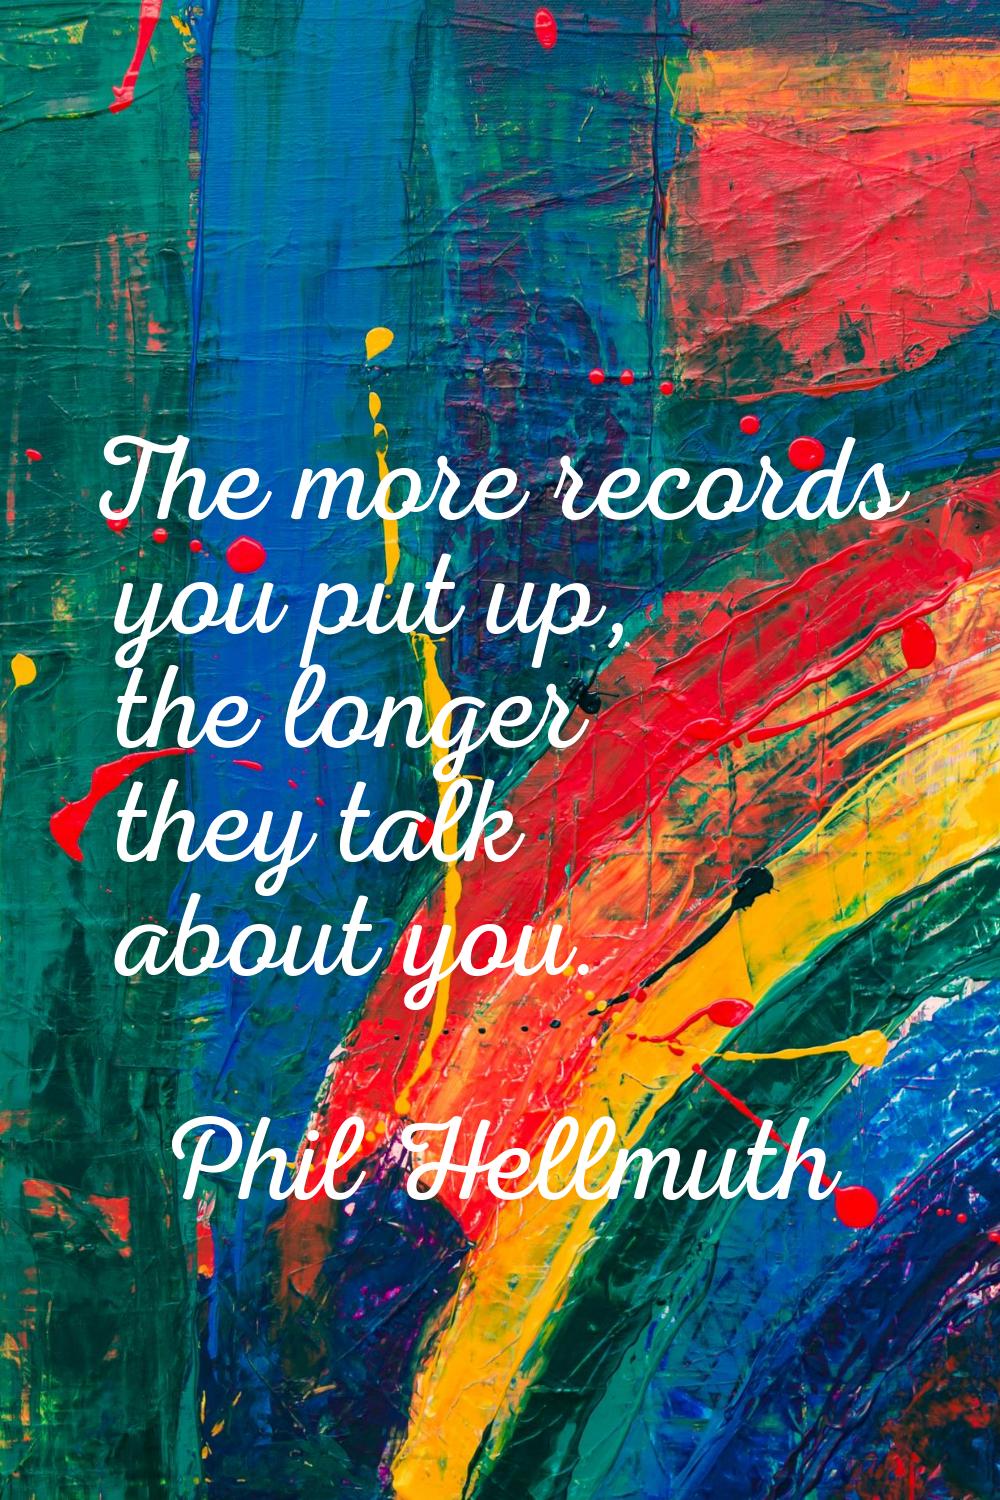 The more records you put up, the longer they talk about you.